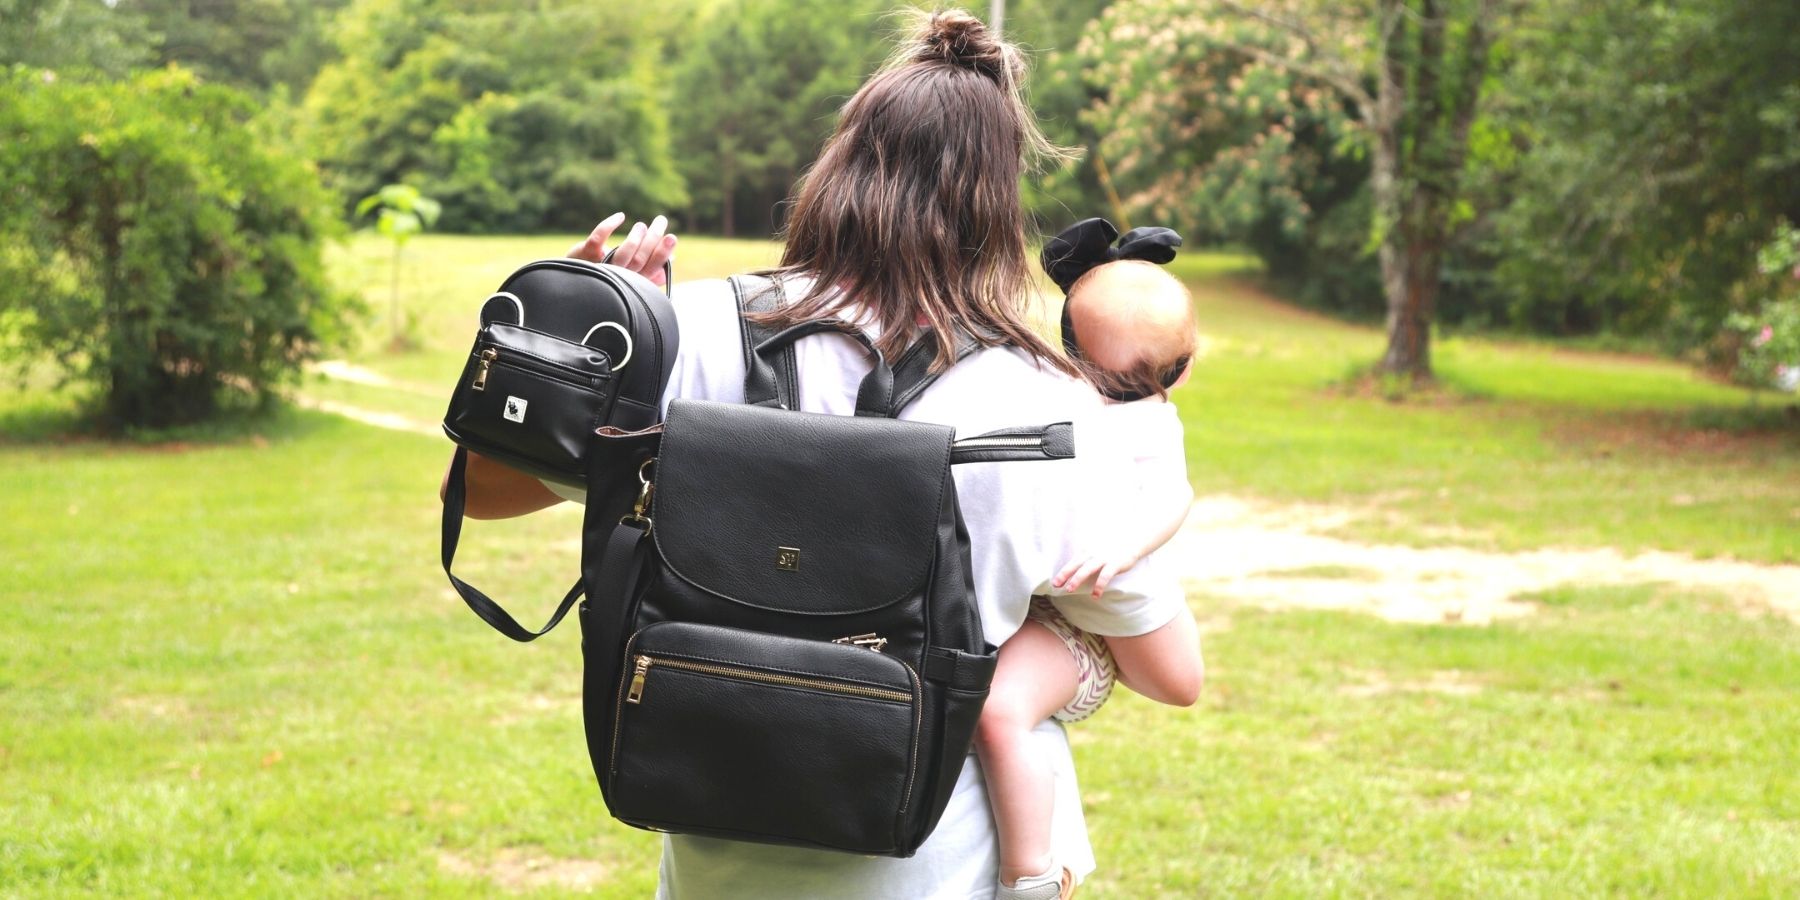 What Should I Carry in my Diaper Bag?